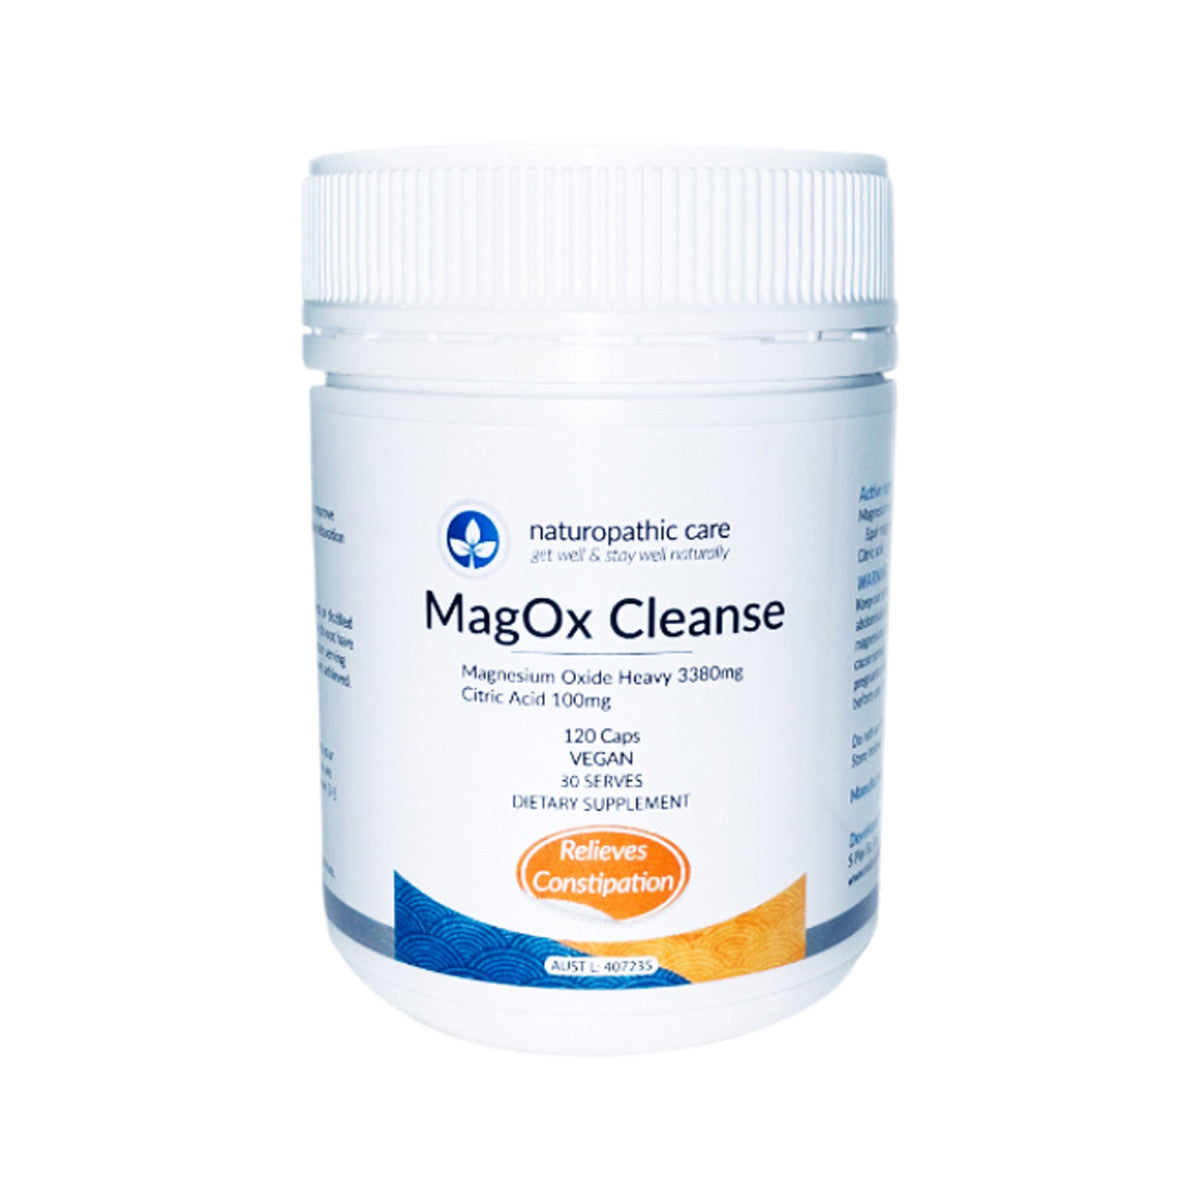 Naturopathic Care - MagOx Cleanse